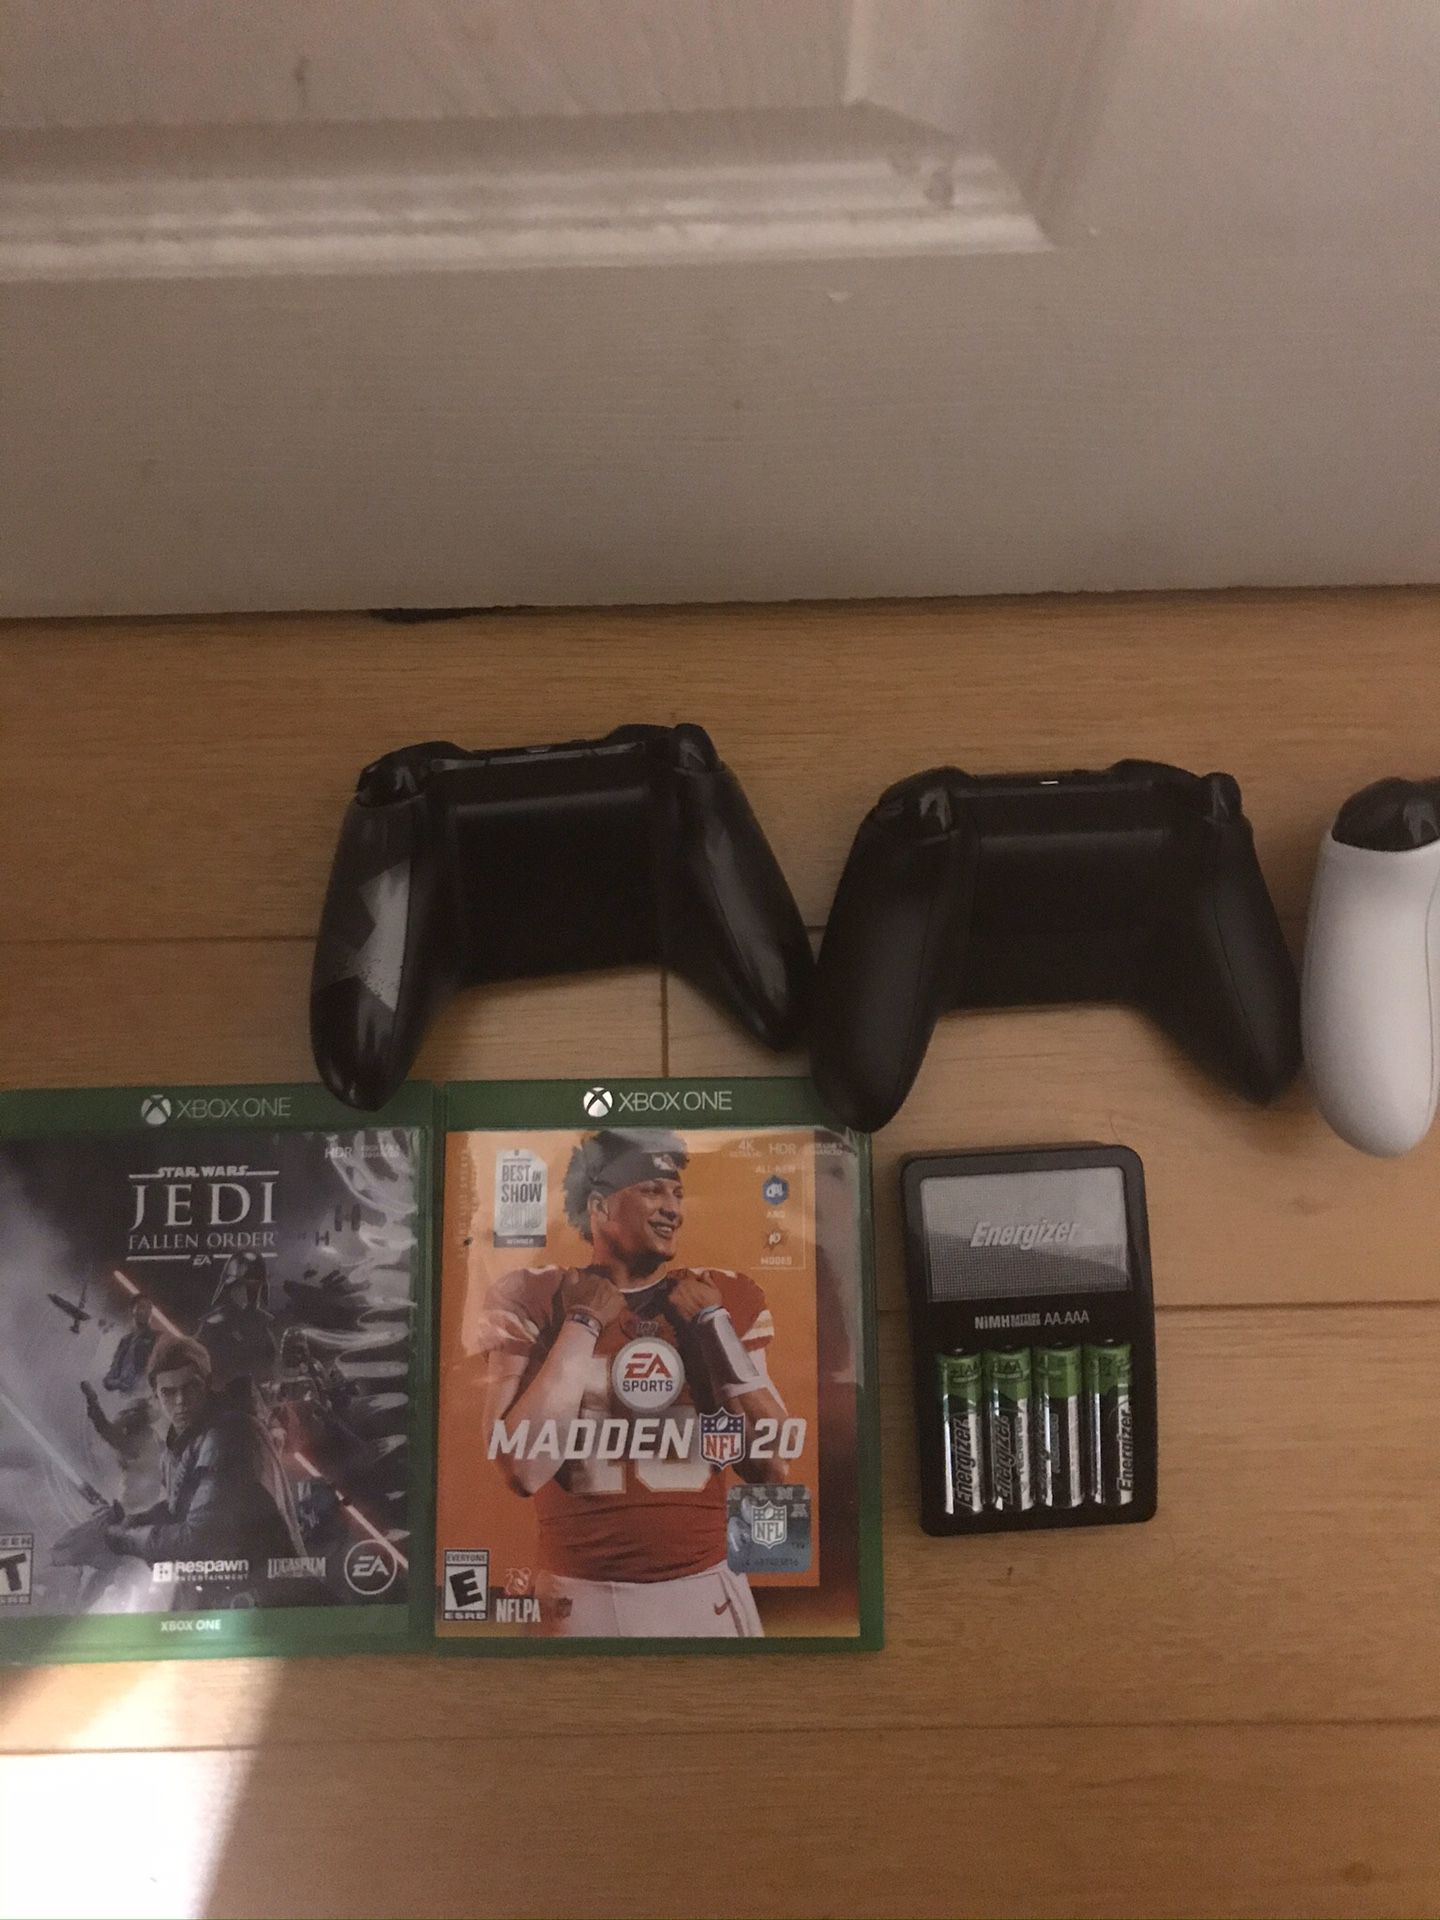 Xbox one console, game, and accessories